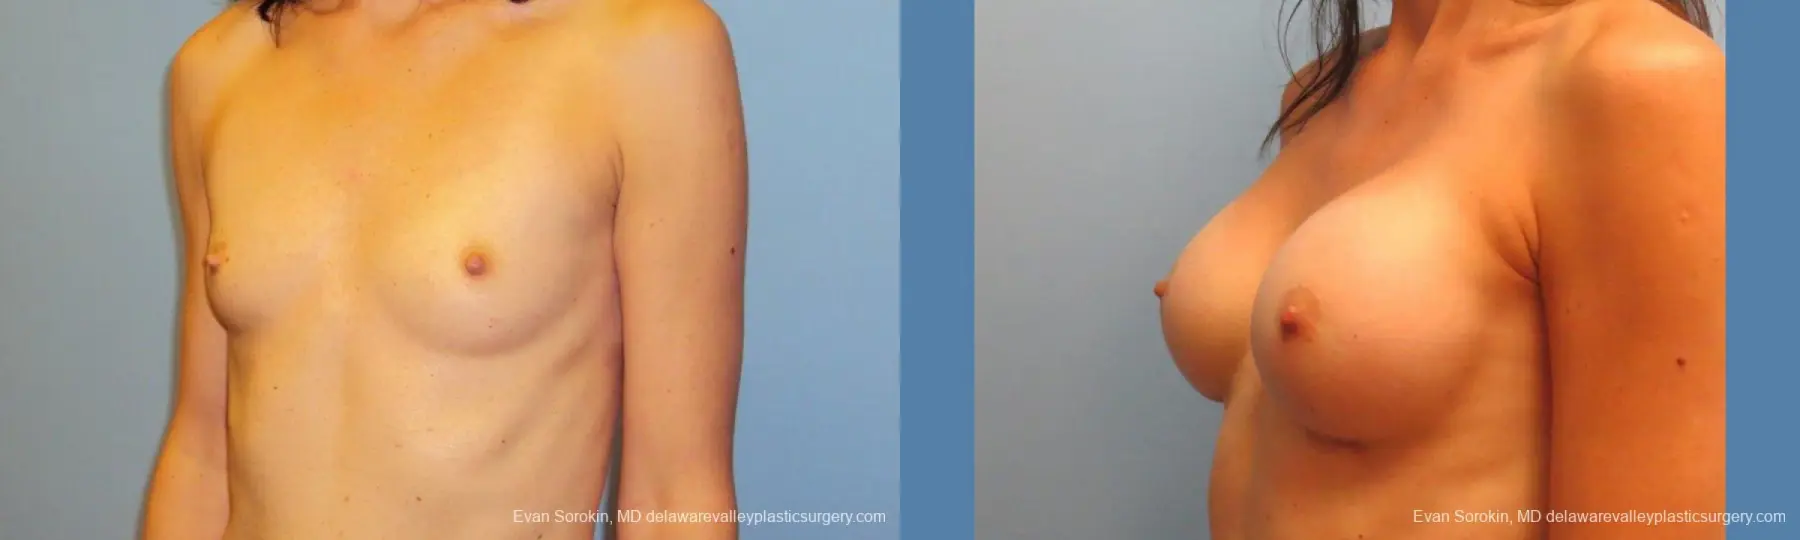 Philadelphia Breast Augmentation 9417 - Before and After 4